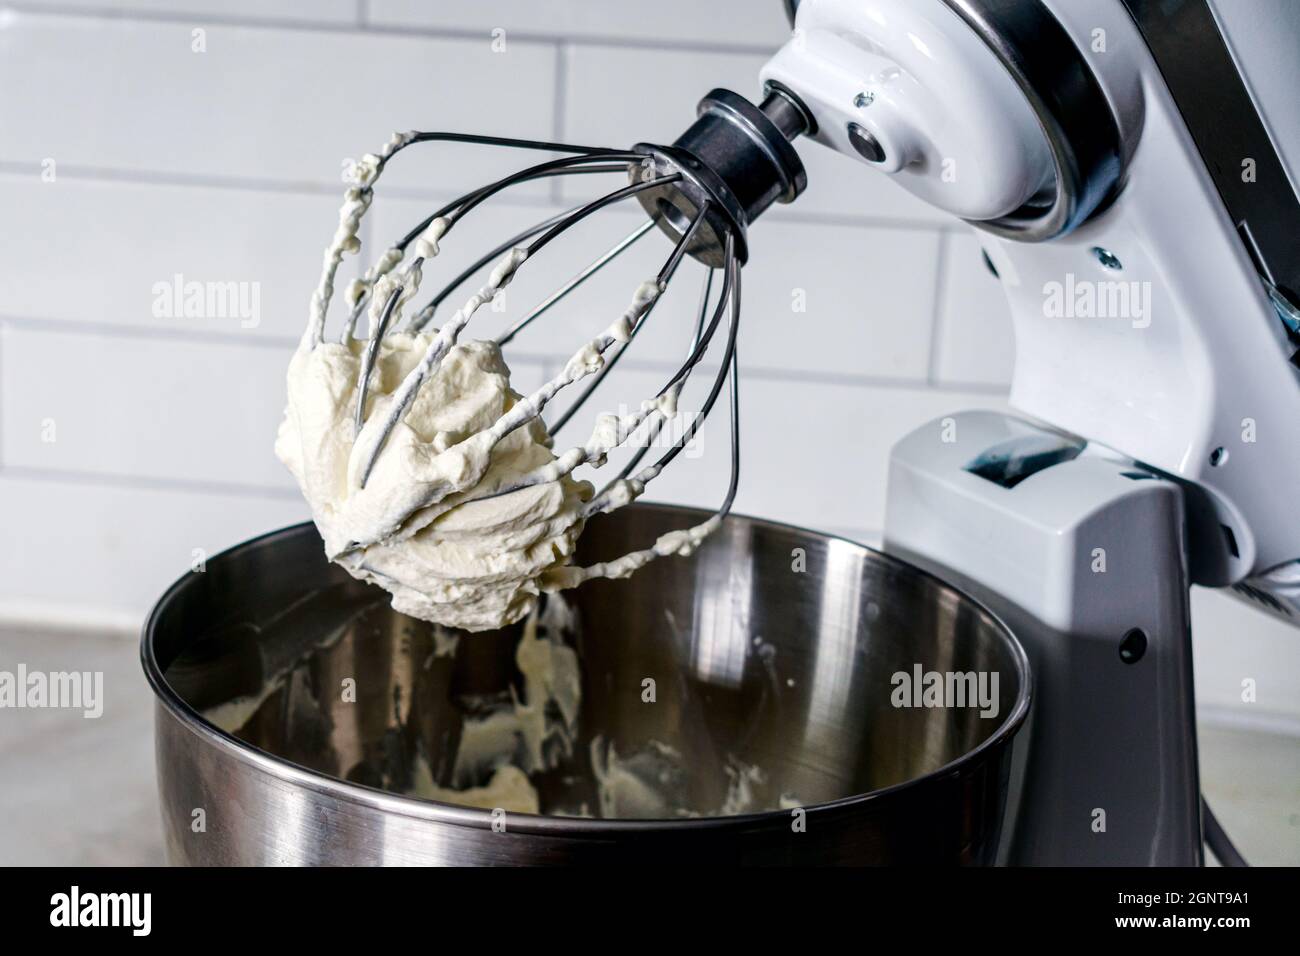 https://c8.alamy.com/comp/2GNT9A1/mixing-whipped-cream-in-a-stand-mixer-with-a-whisk-attachment-heavy-whipping-cream-mixed-with-a-stand-mixer-wire-whisk-2GNT9A1.jpg